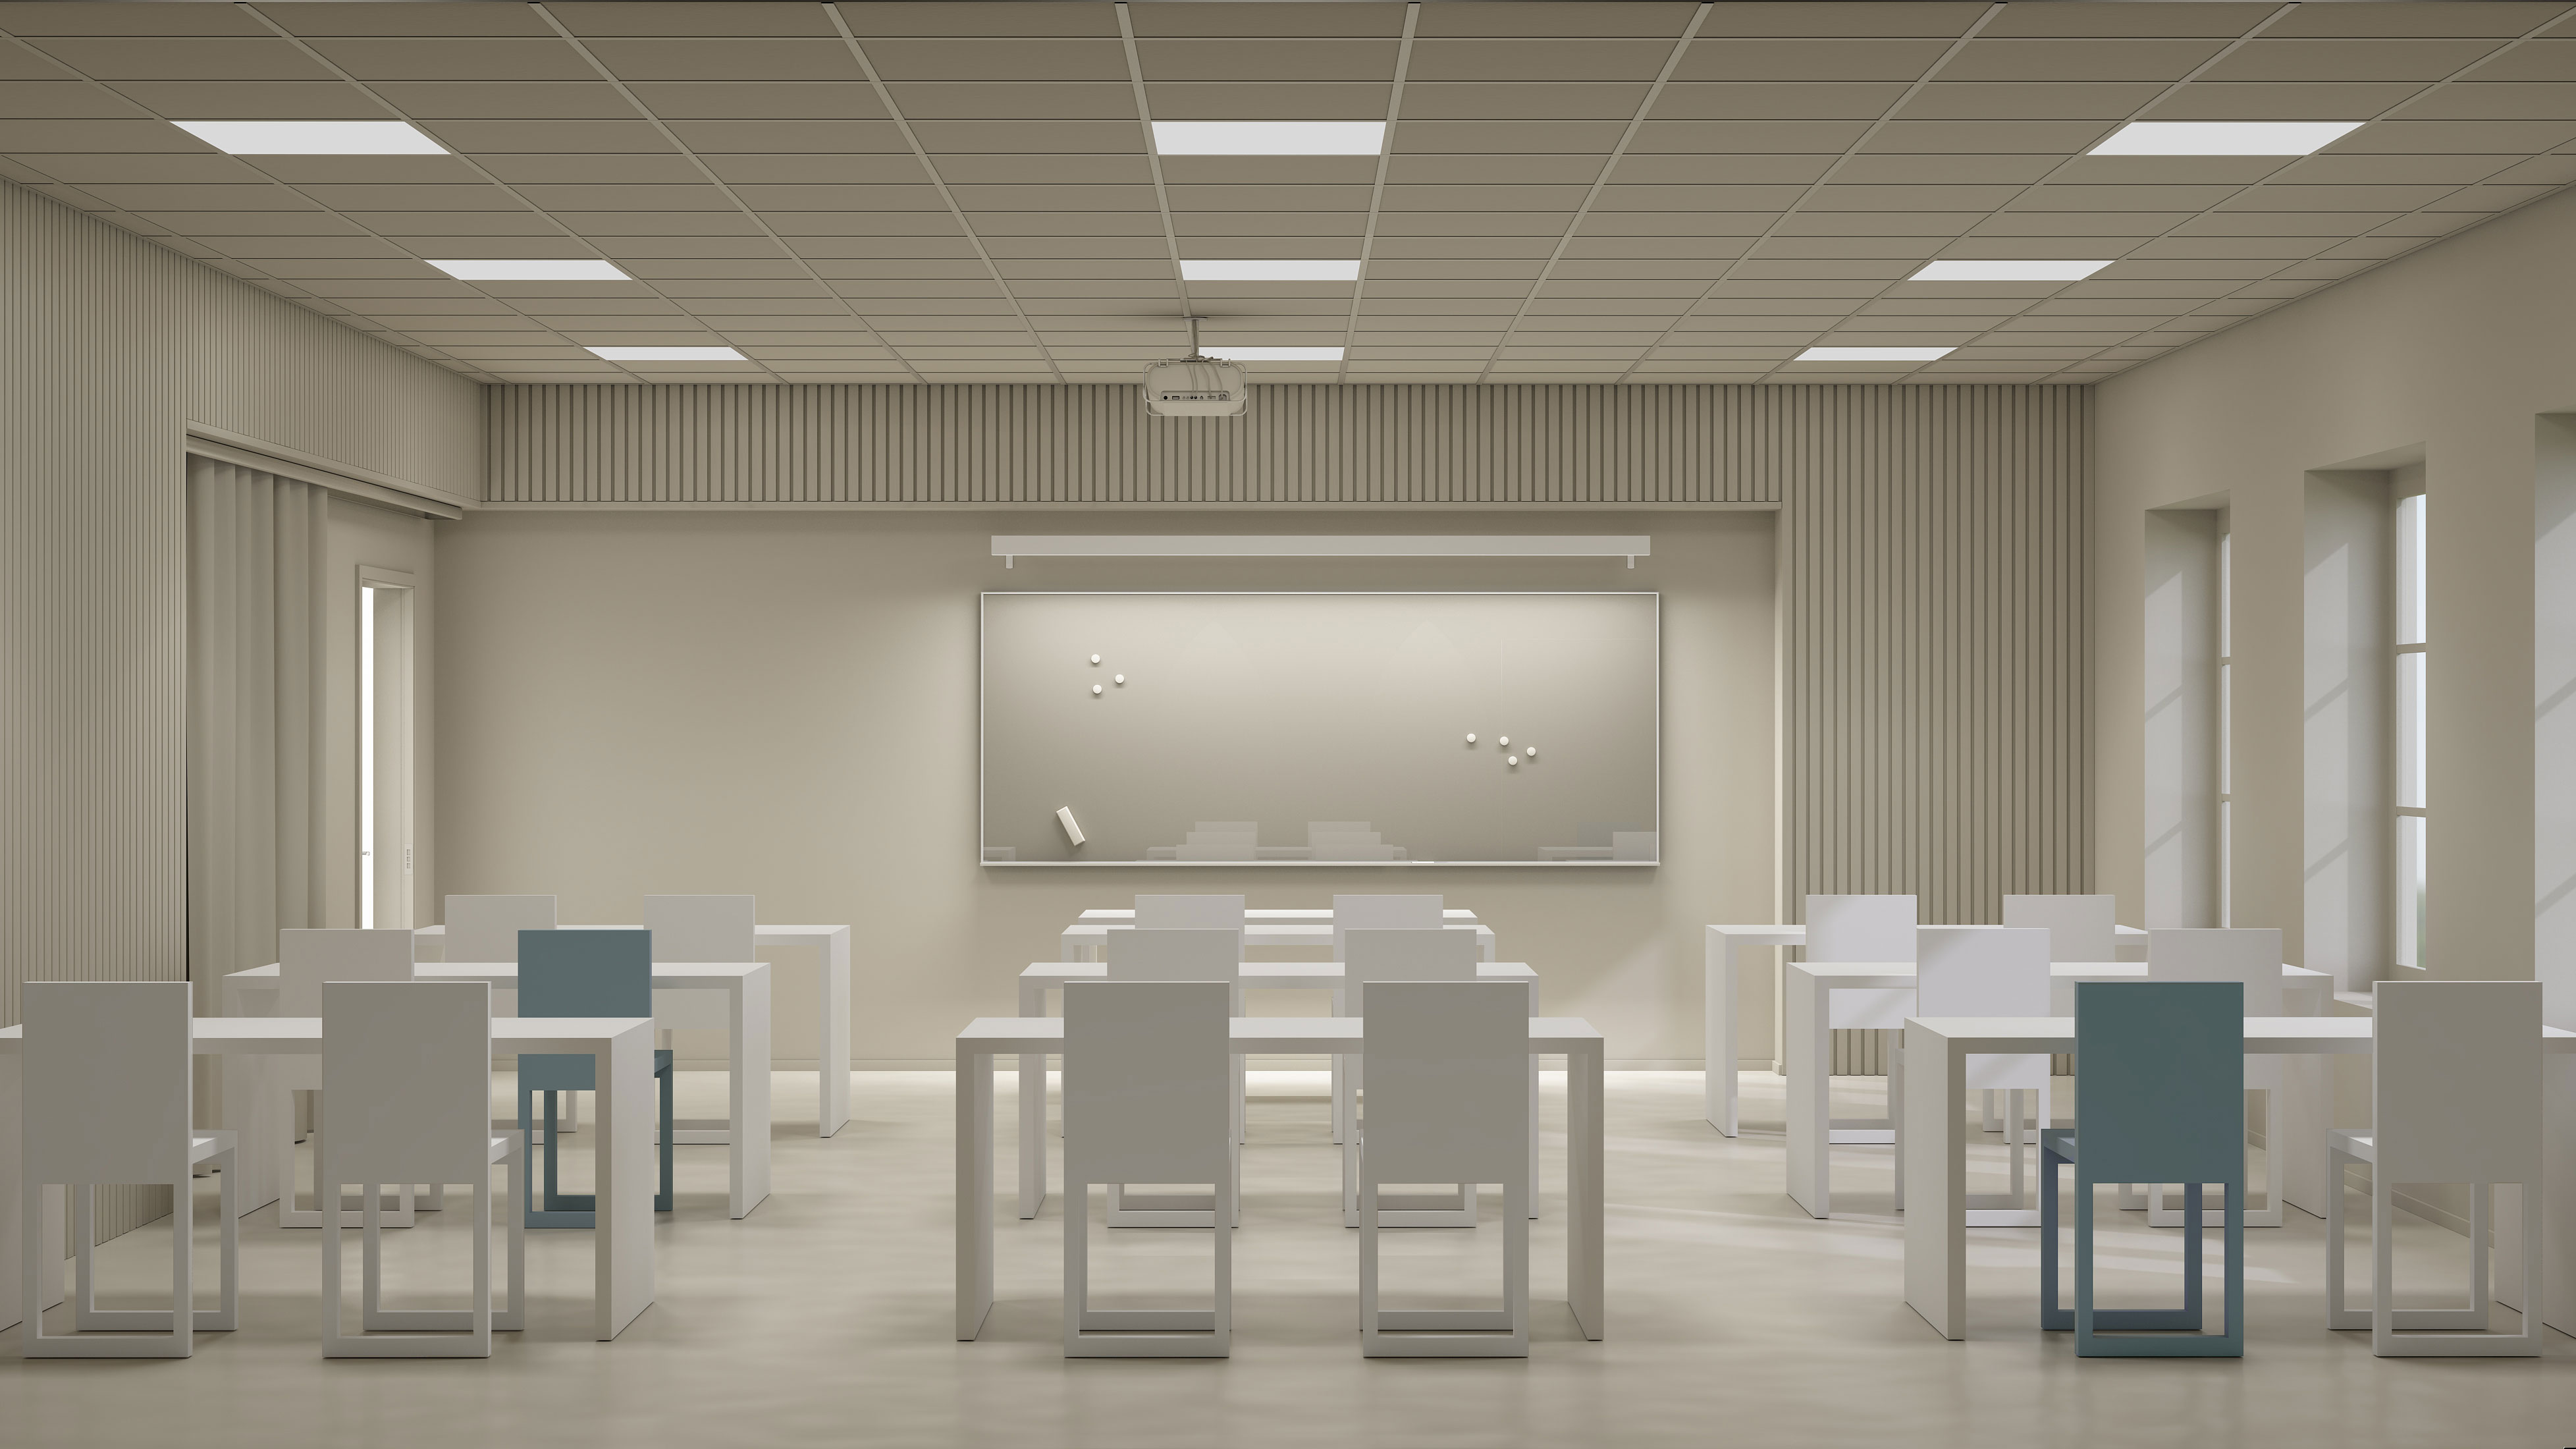 Classrooms with recessed lighting